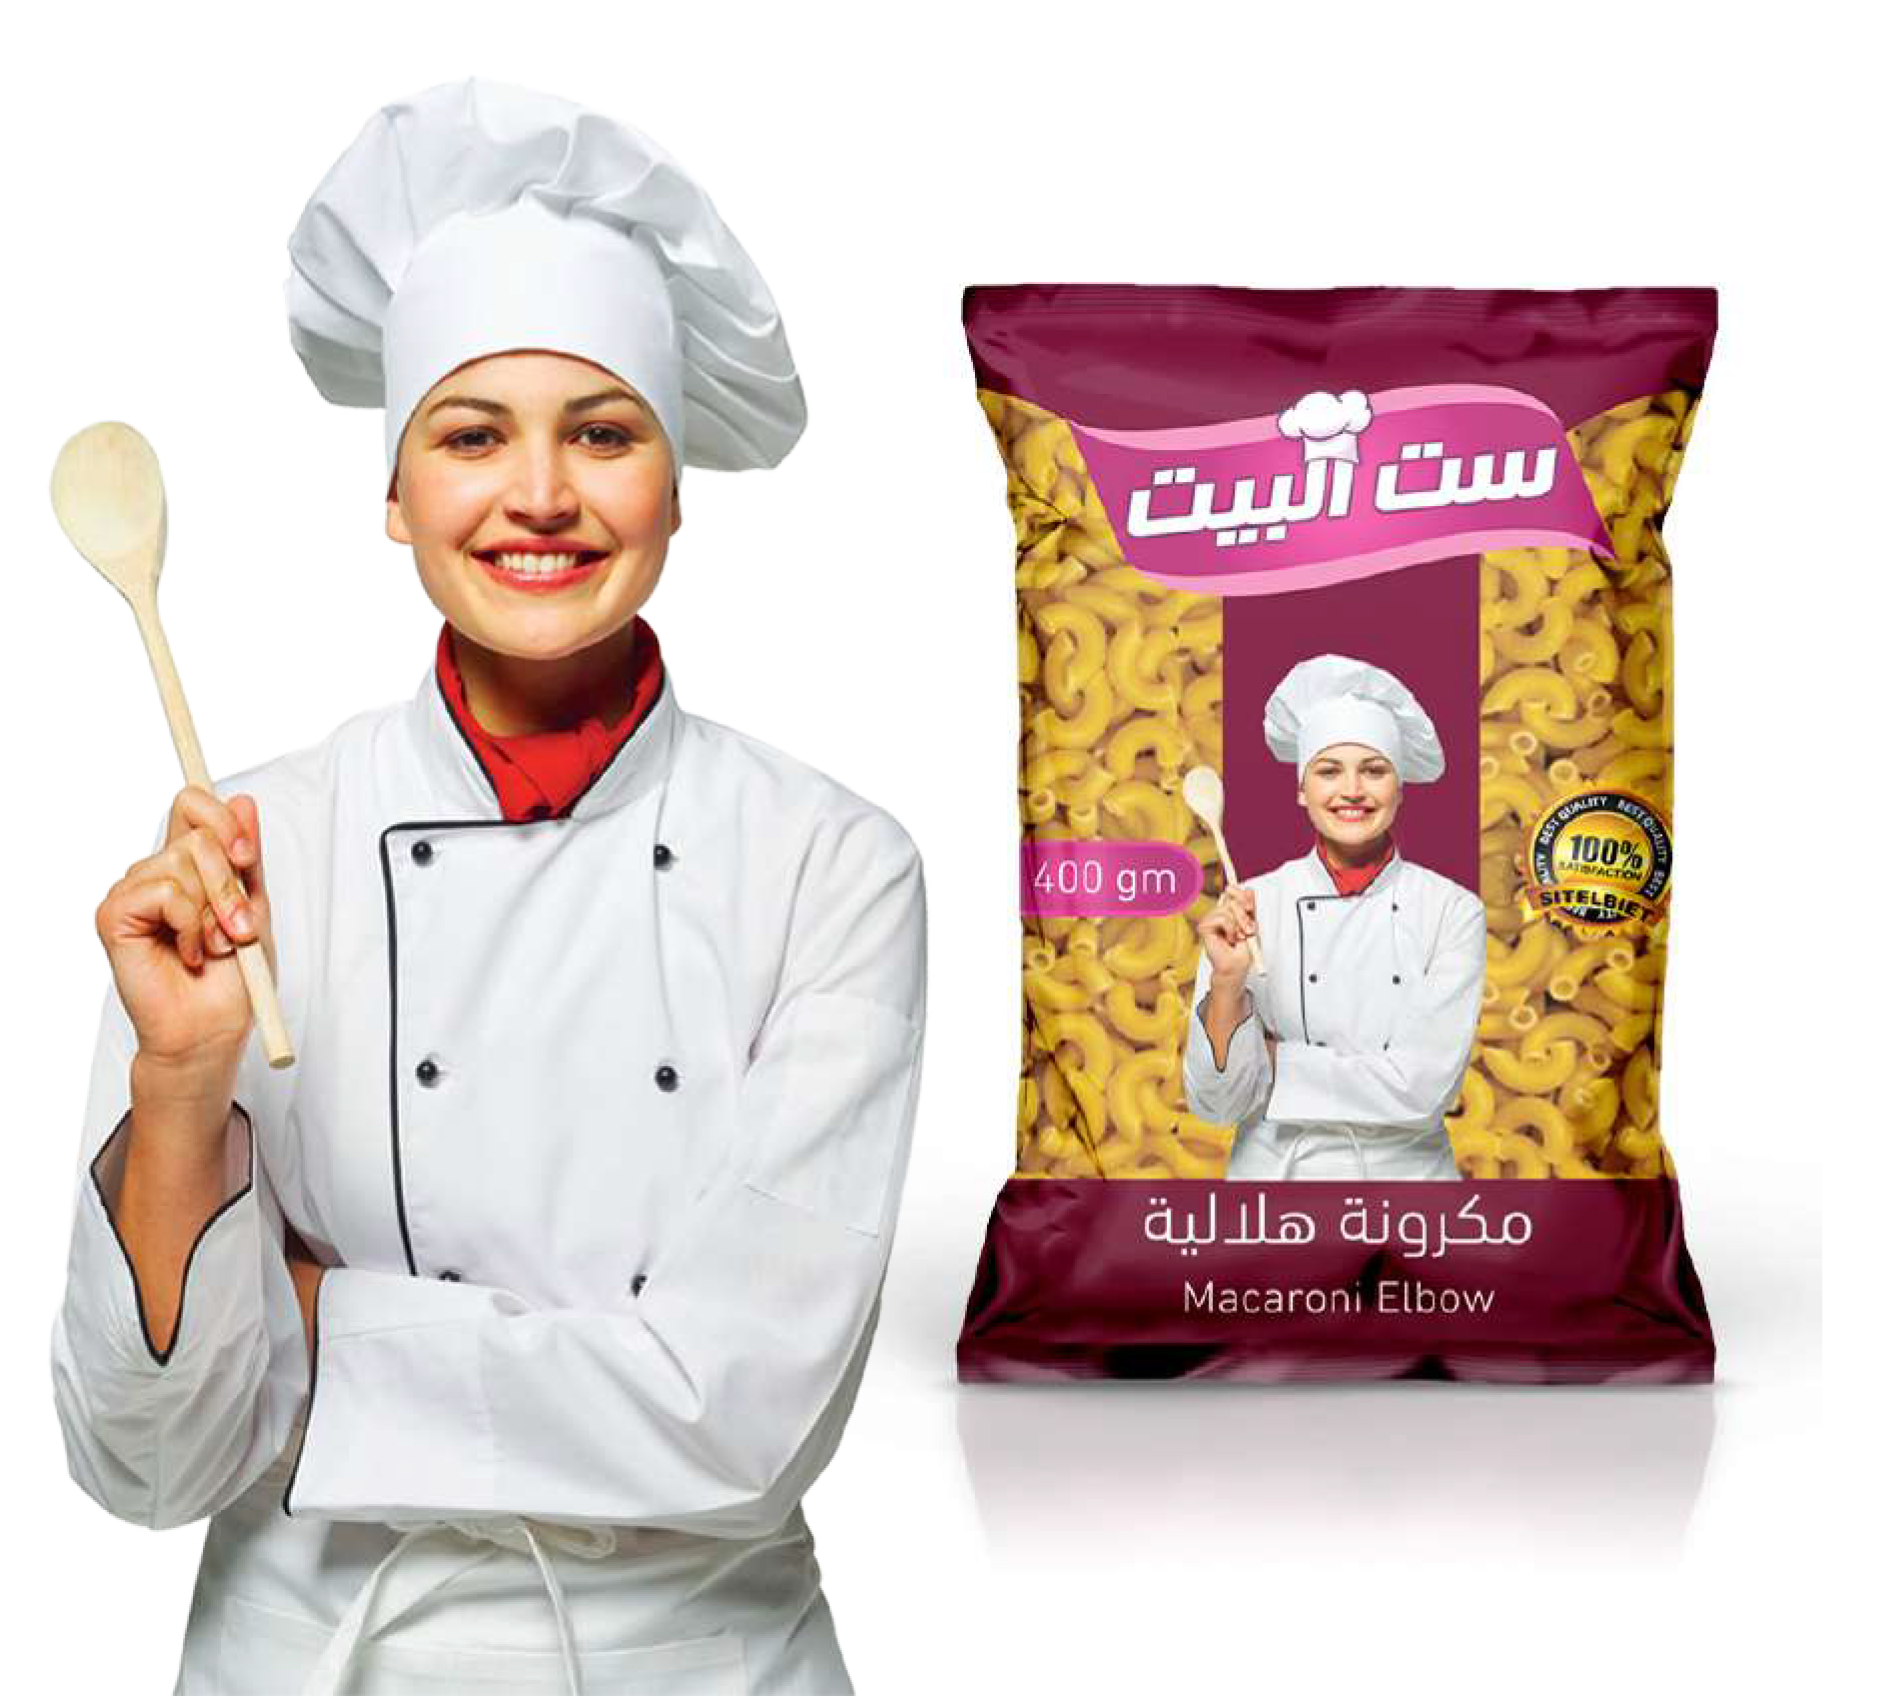 Packaging Design for “sit elbiet” Macaroni product